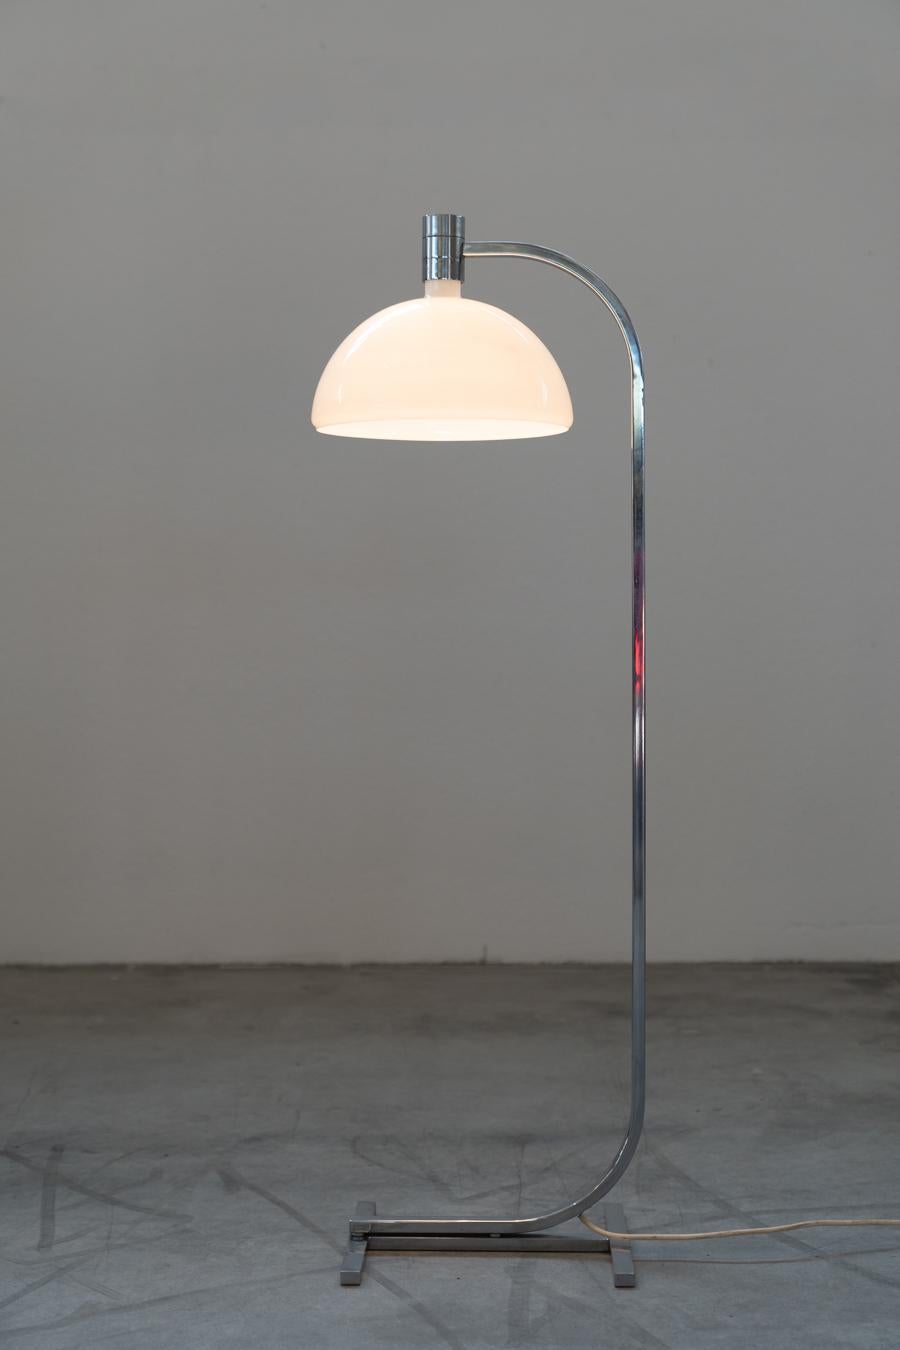 Mid-20th Century AM-AS floor lamp, by Franco Albini, Franca Helg, Antonio Piva, from Sirrah For Sale